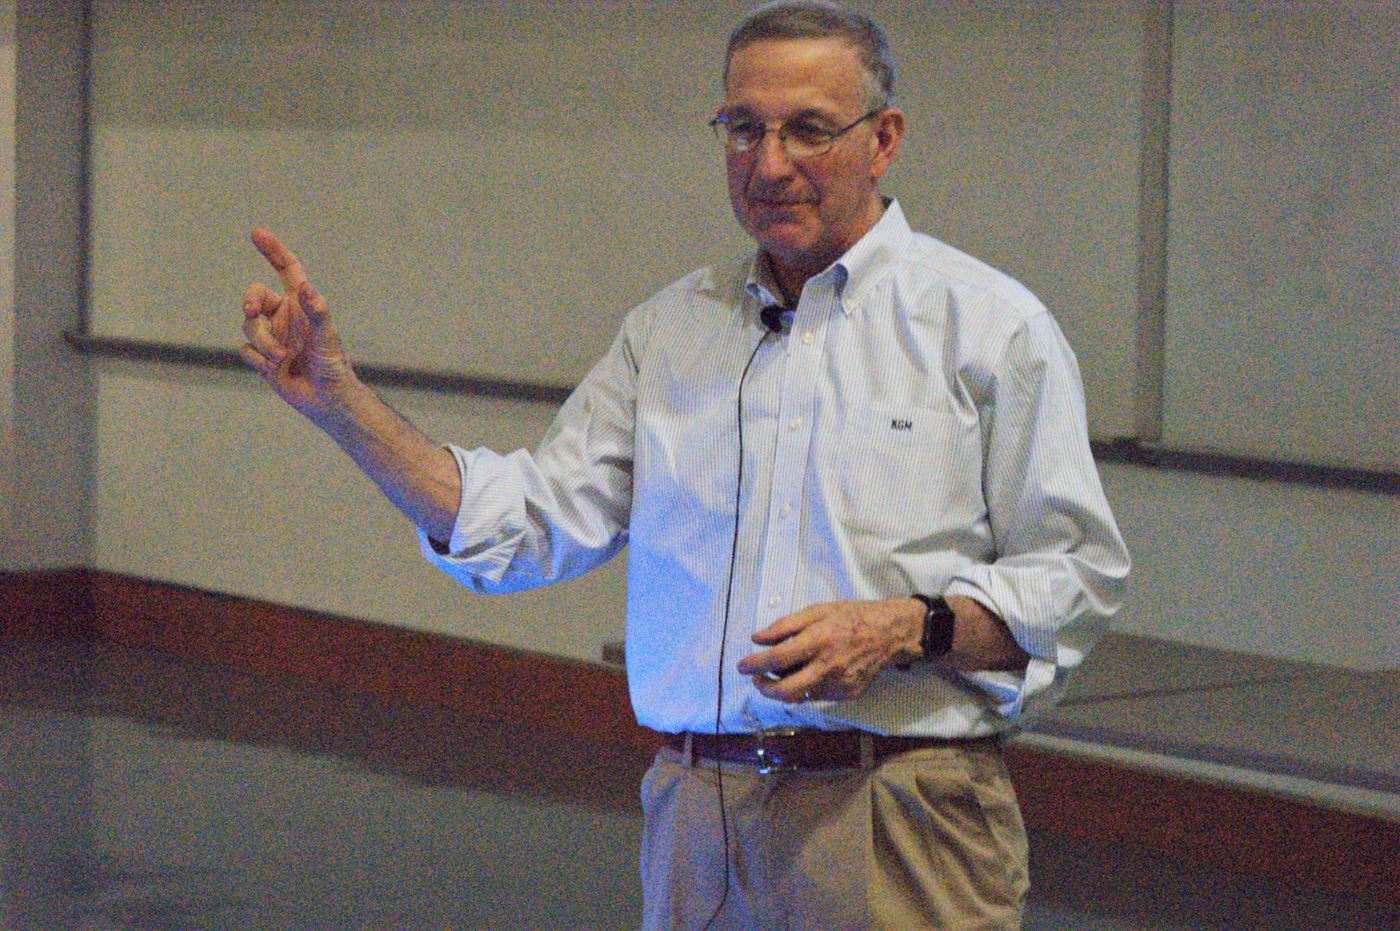 Professor Kenneth Miller from Rutgers University lectures on the rising of sea levels. Adrianna Caraballo | The Montclarion